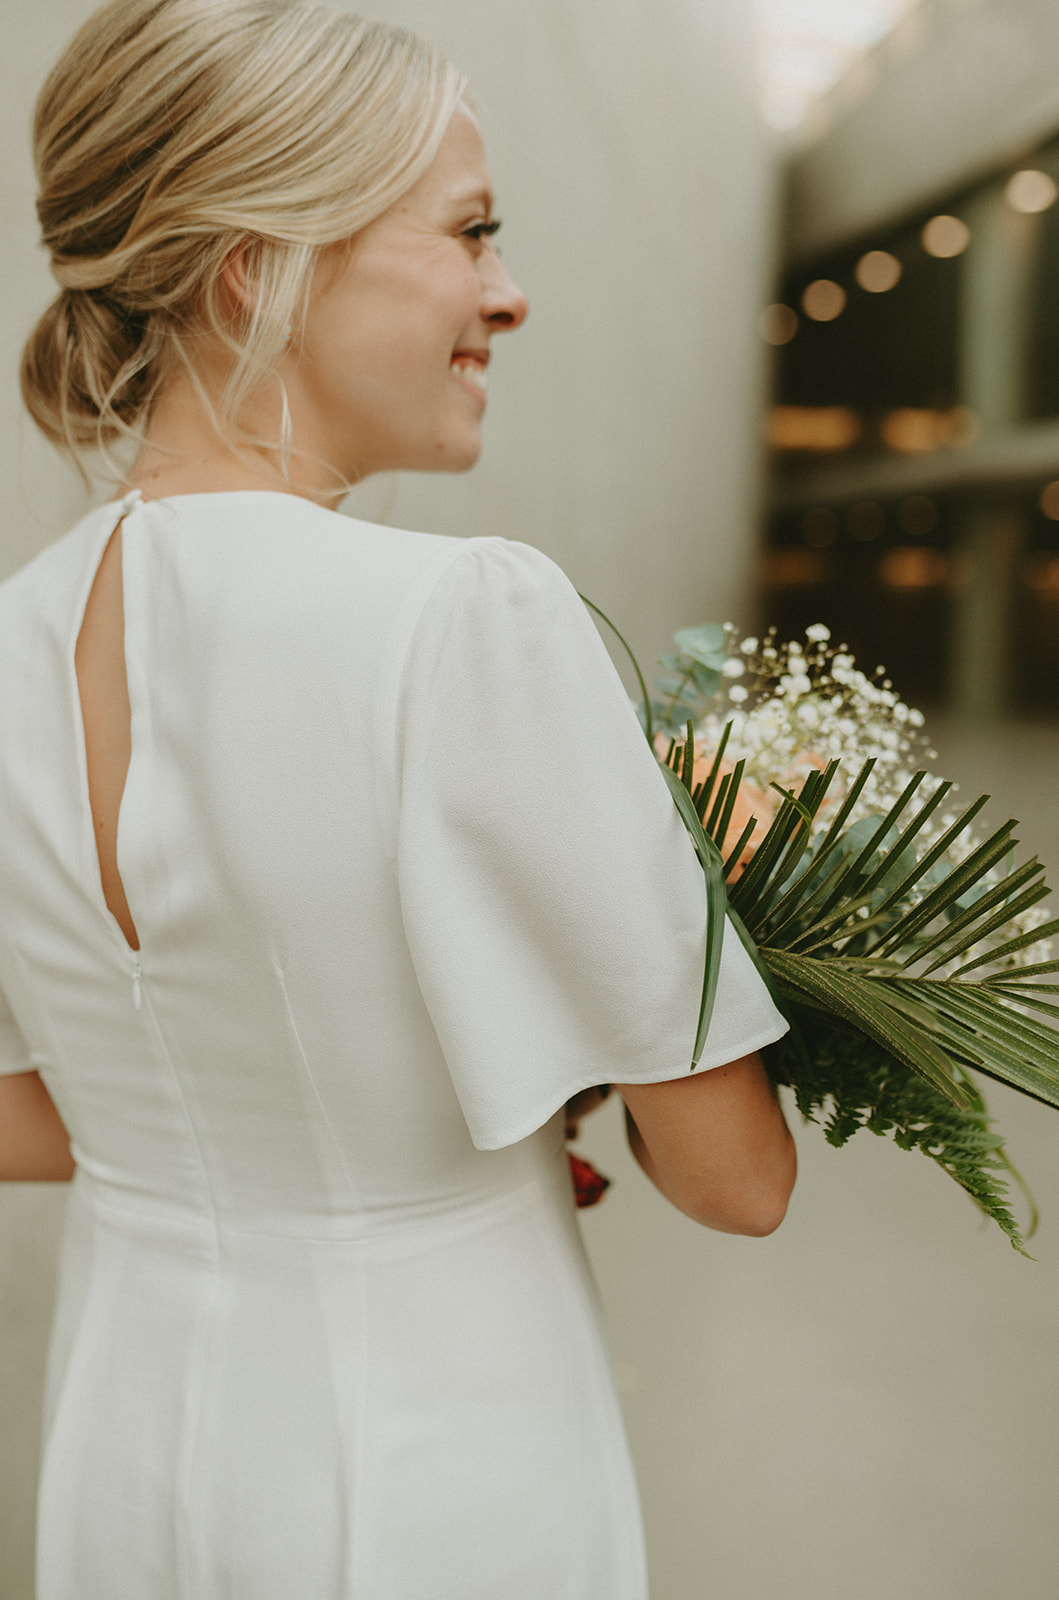 This Minimalist Micro-Wedding features a DIY Bouquet Made by the Bride Herself - crepe wedding dress, bridal bouquet